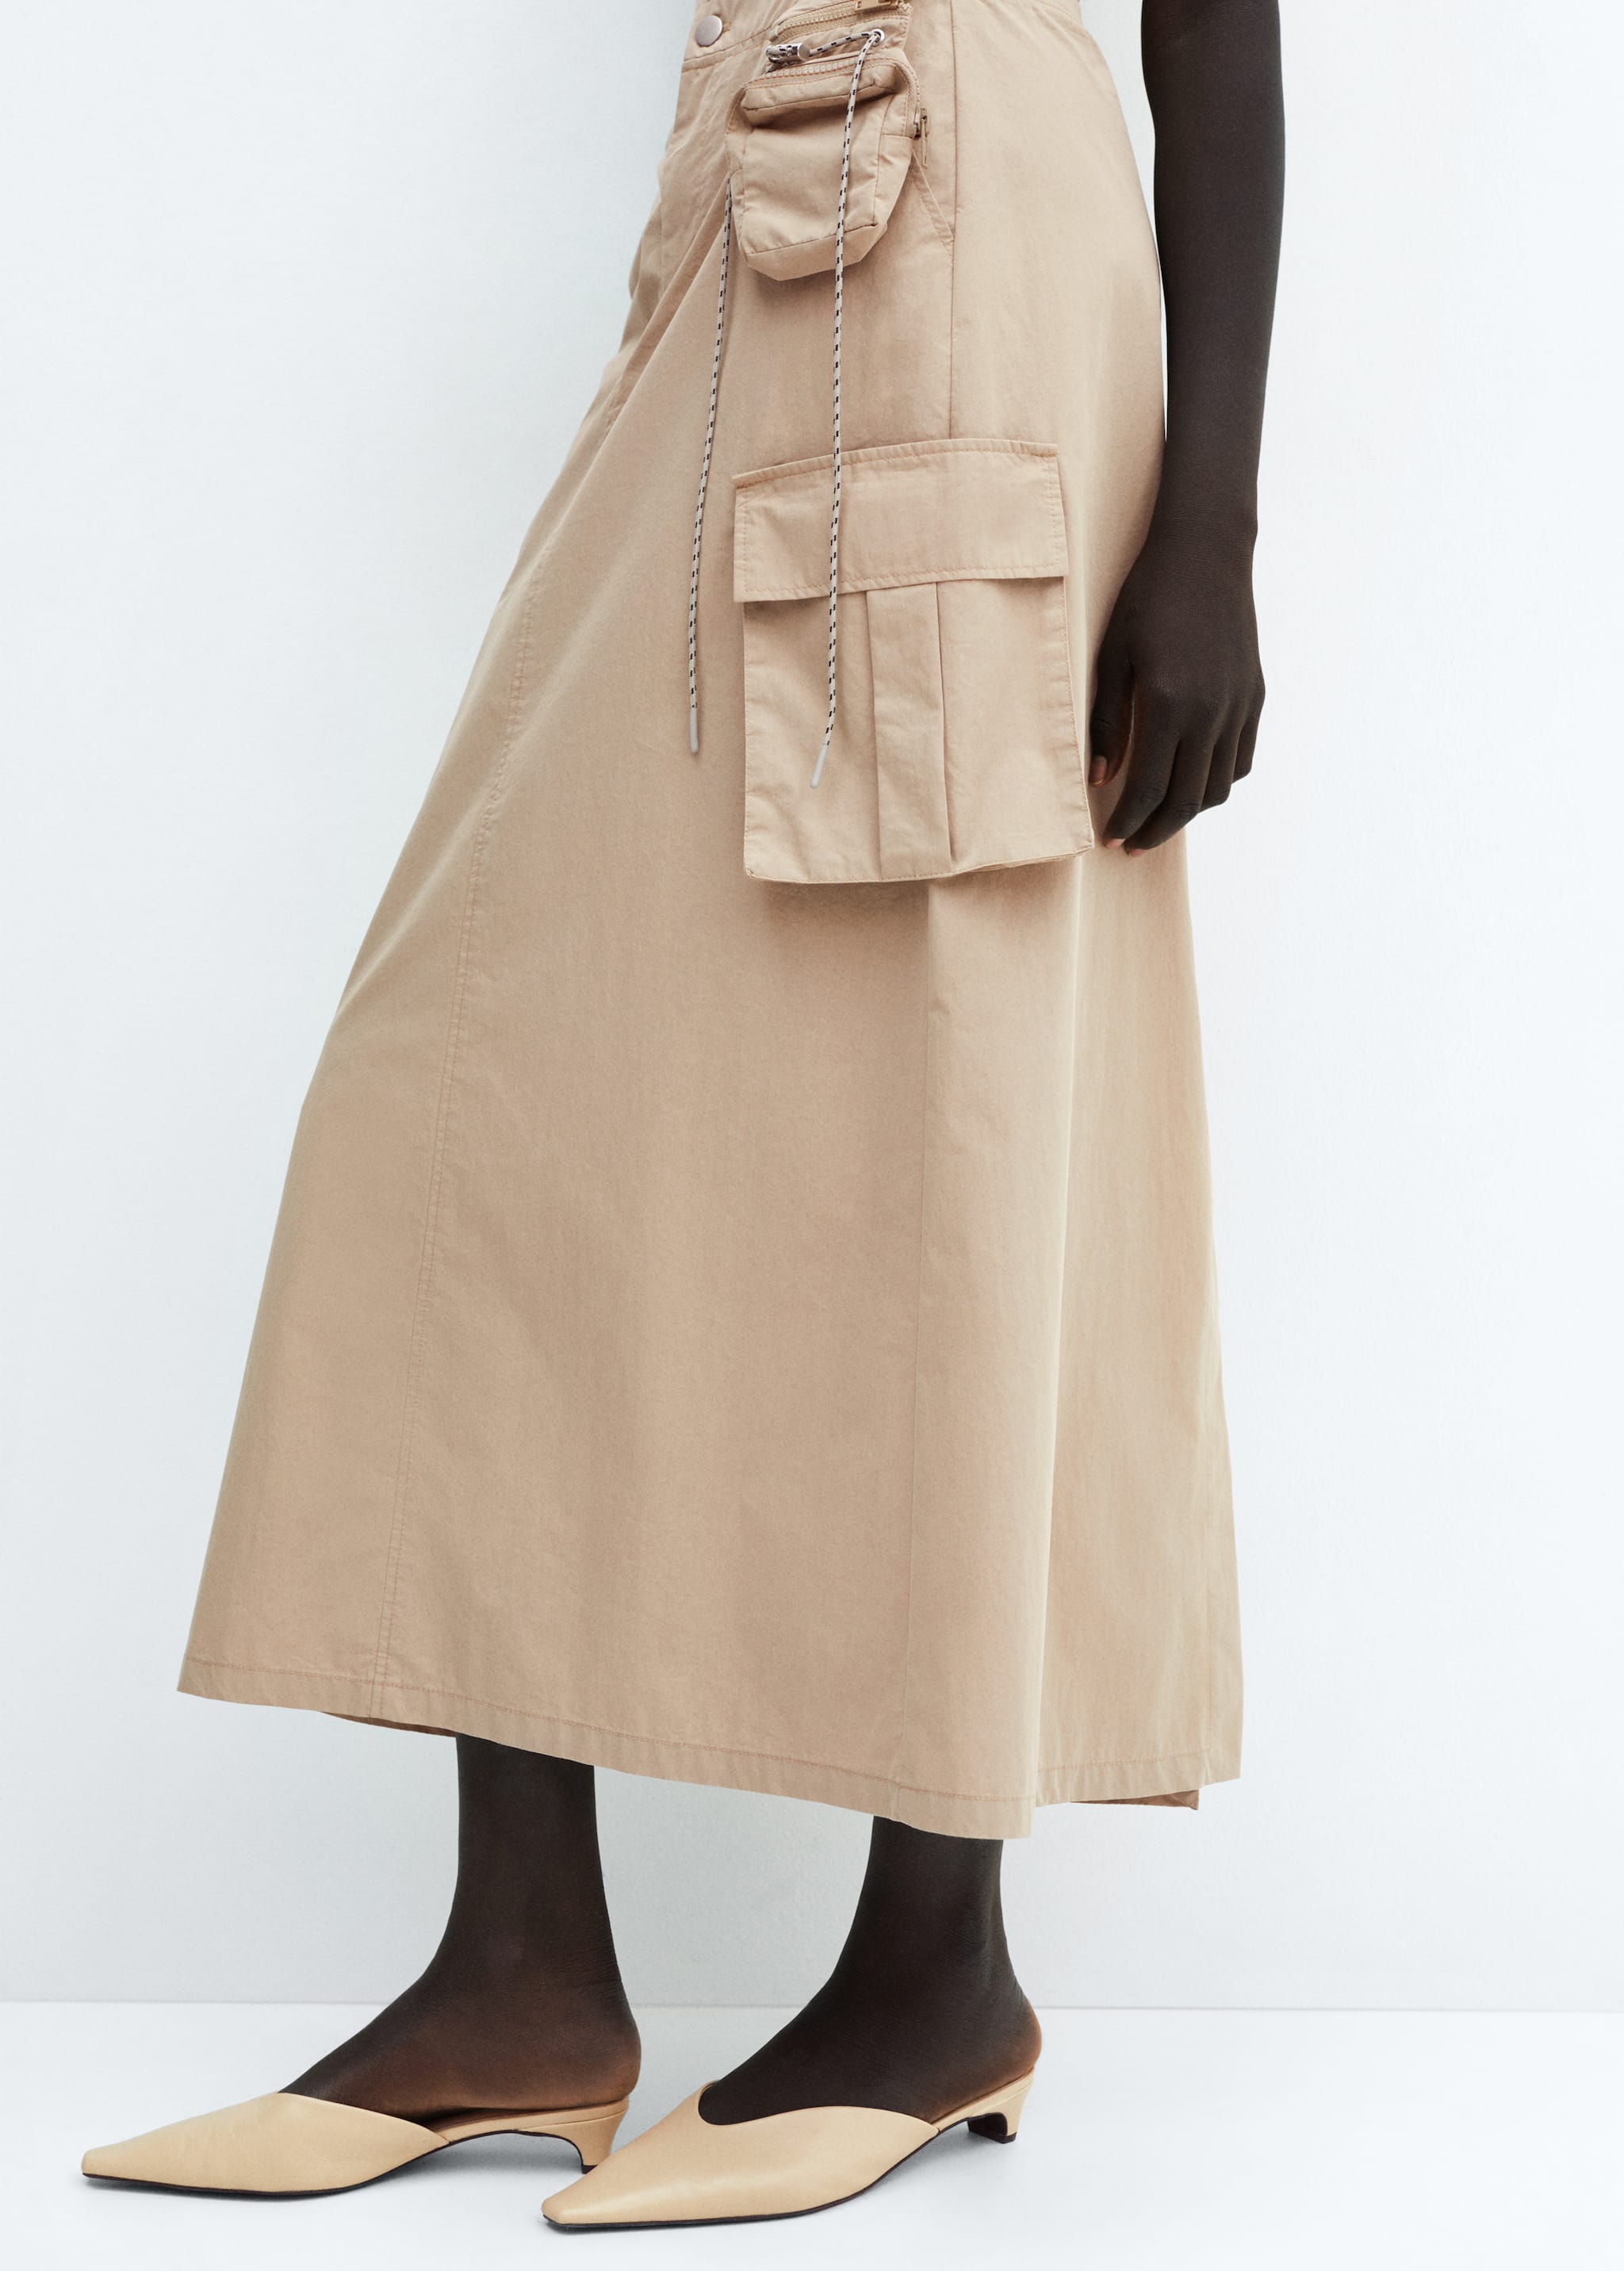 Long cargo skirt with pocket - Details of the article 6